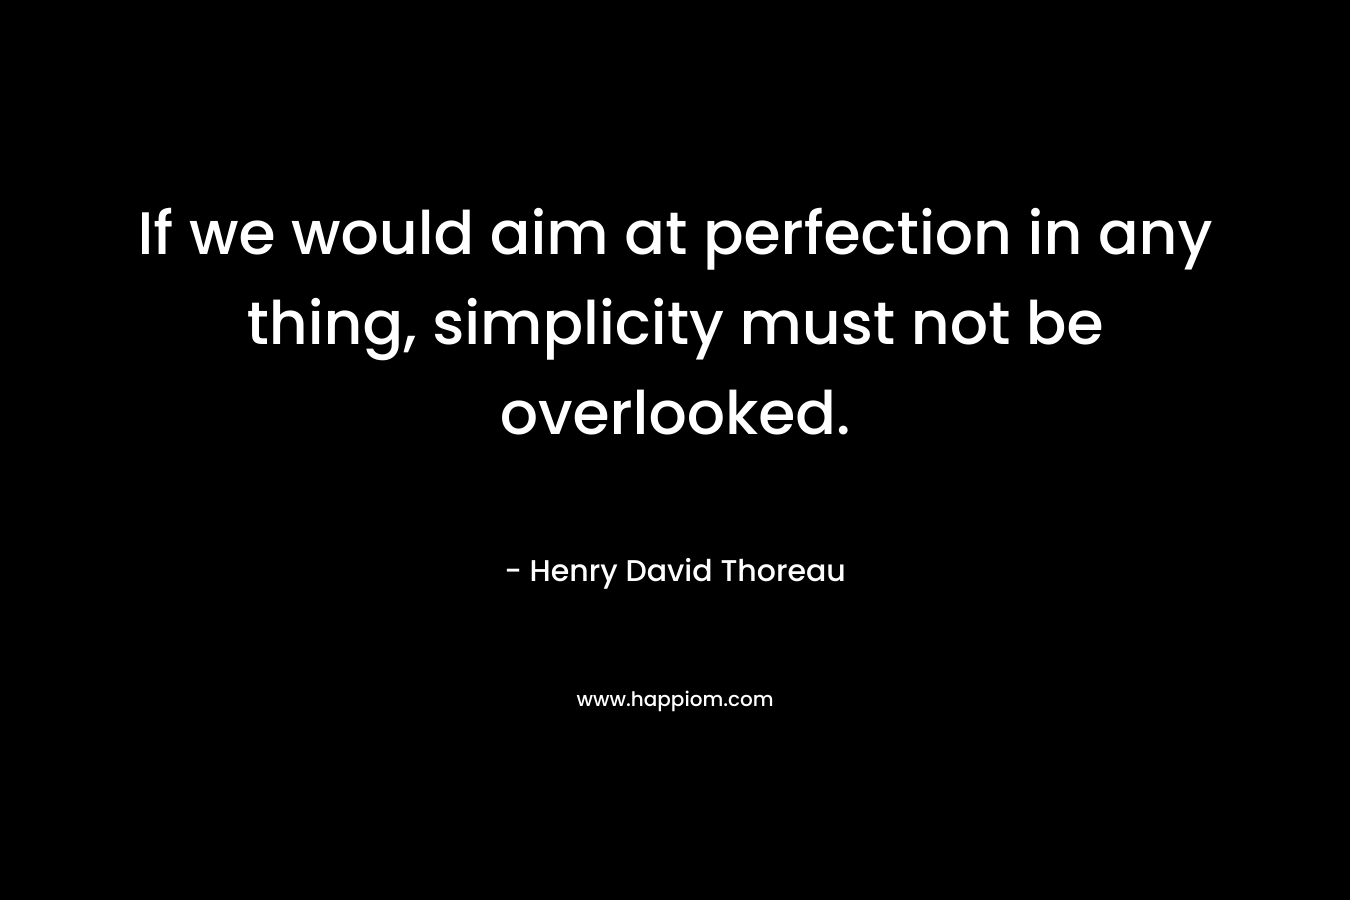 If we would aim at perfection in any thing, simplicity must not be overlooked. – Henry David Thoreau